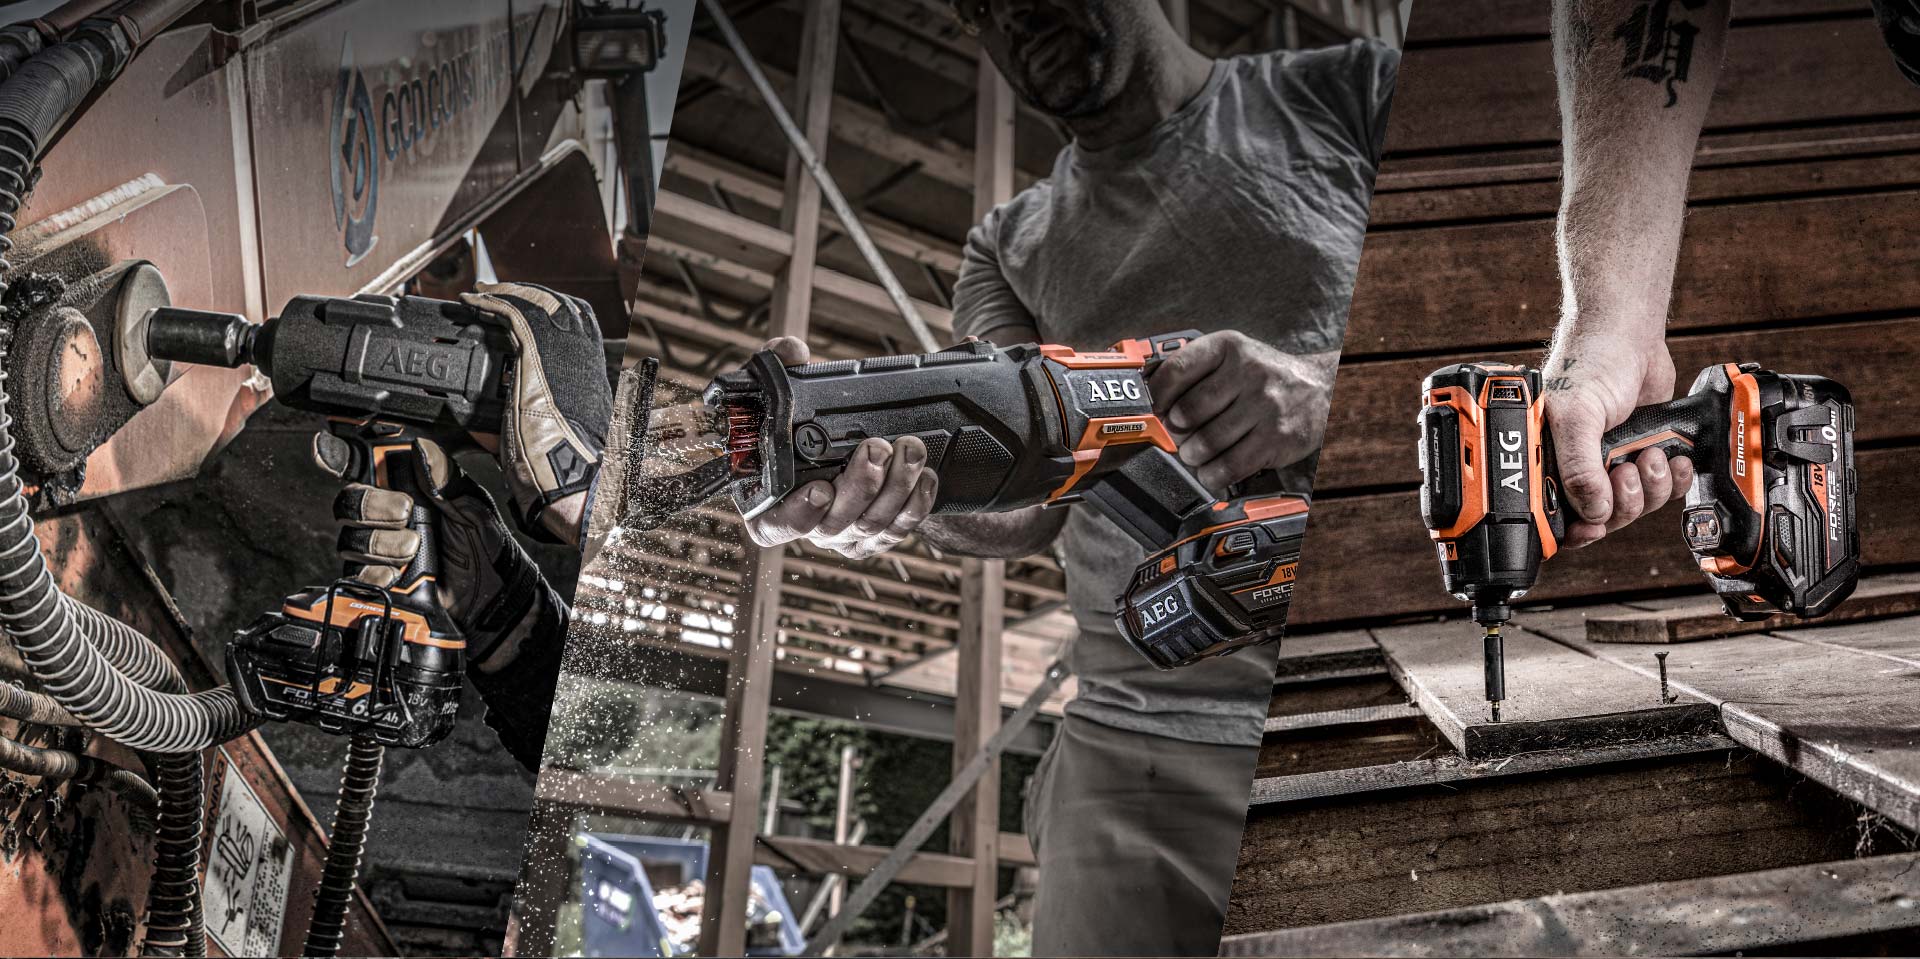 A composite image featuring three AEG tools in action. An AEG Impact Driver is used to tighten a nut, an AEG reciprocating saw is used to cut timber, and an AEG drill driver is used to secure floorboards.